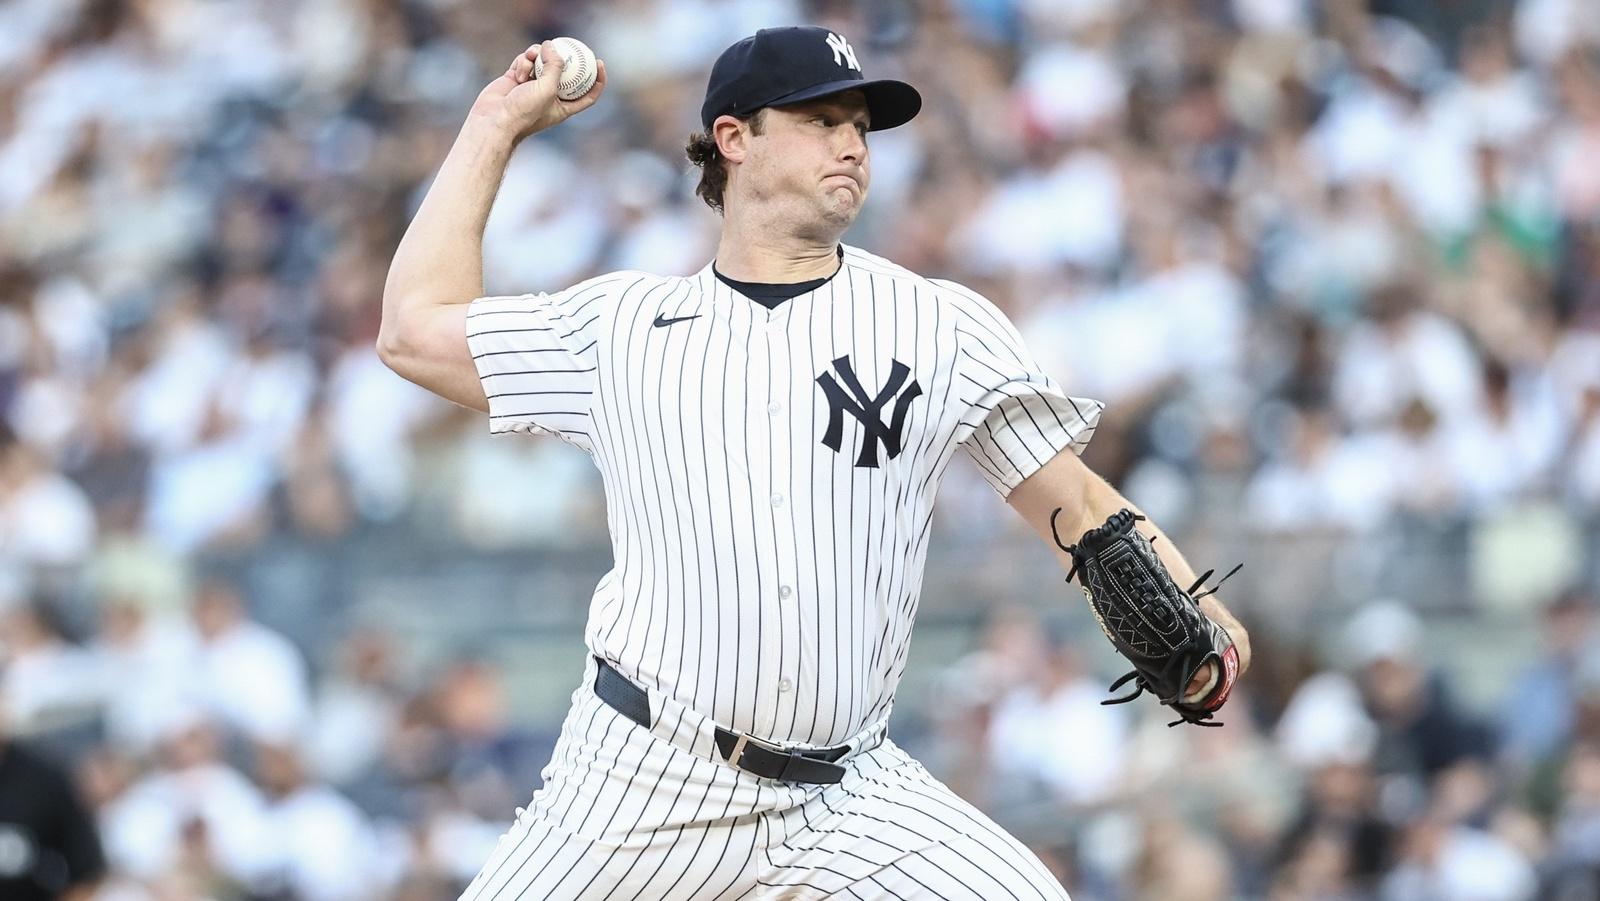 Yankees ace Gerrit Cole tosses 62 pitches, strikes out five in season debut